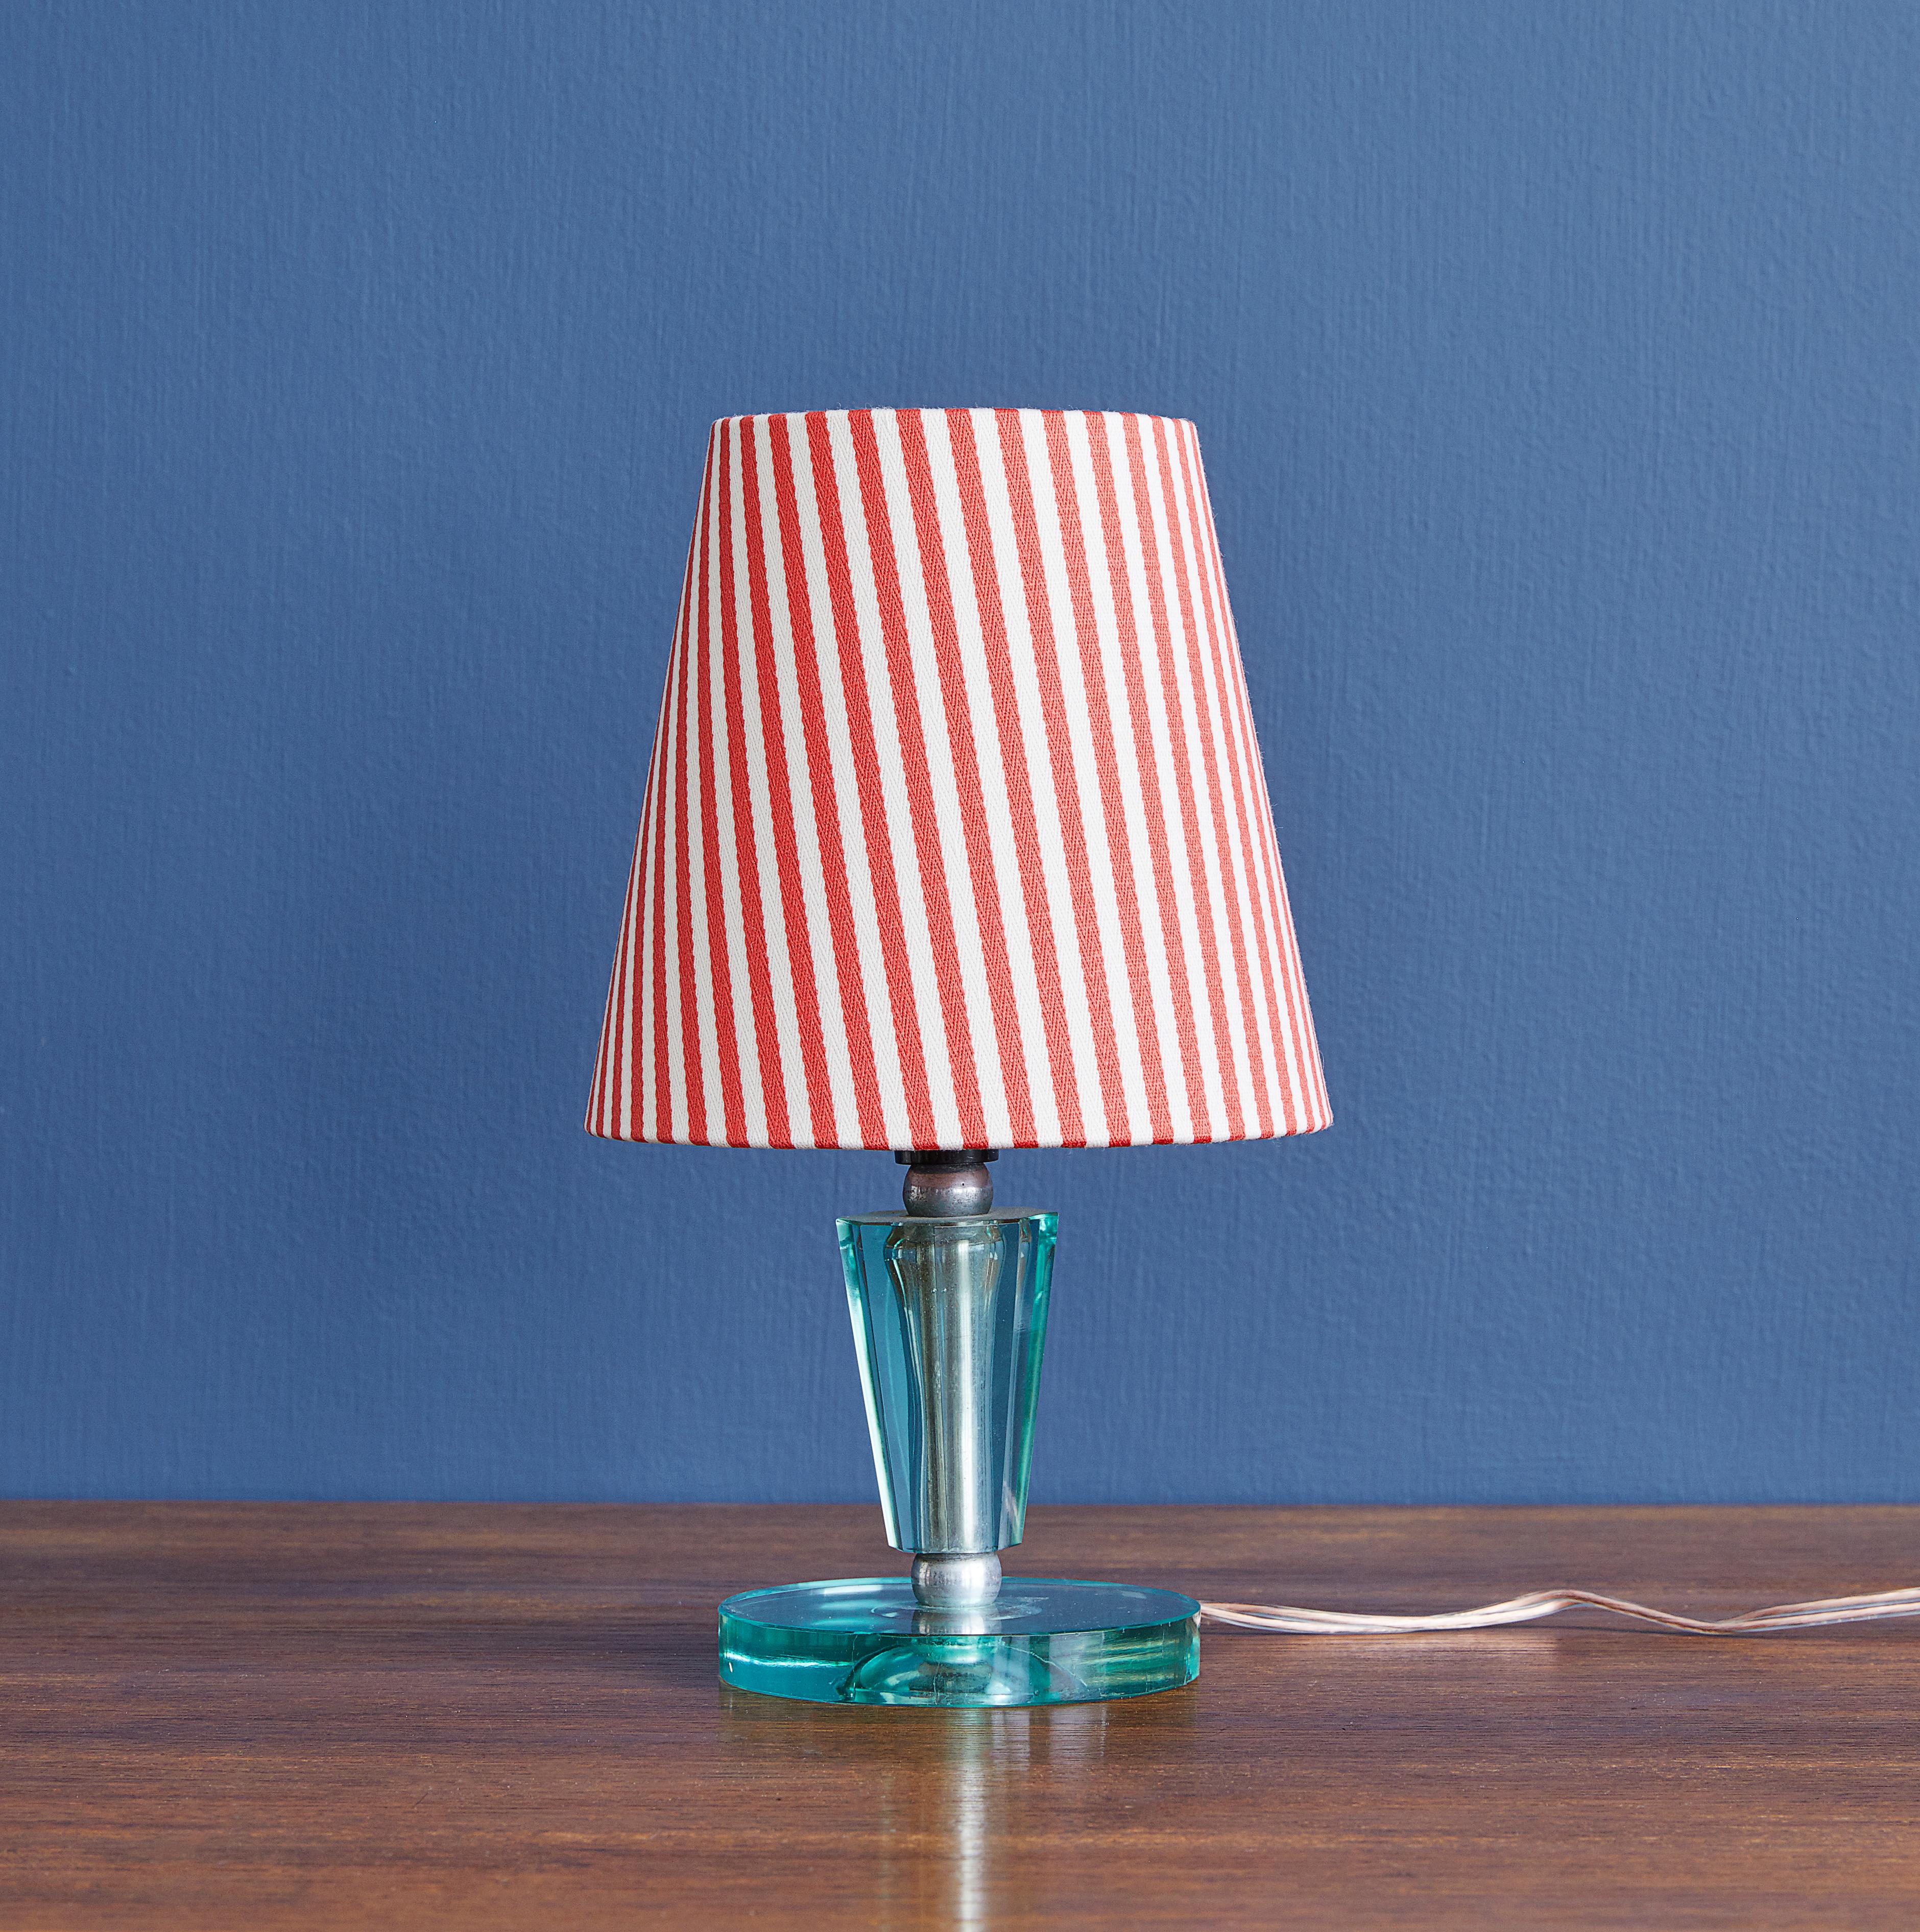 Vintage Italian table lamp in clear Murano glass with brass fittings. New linen shade with red stripes.